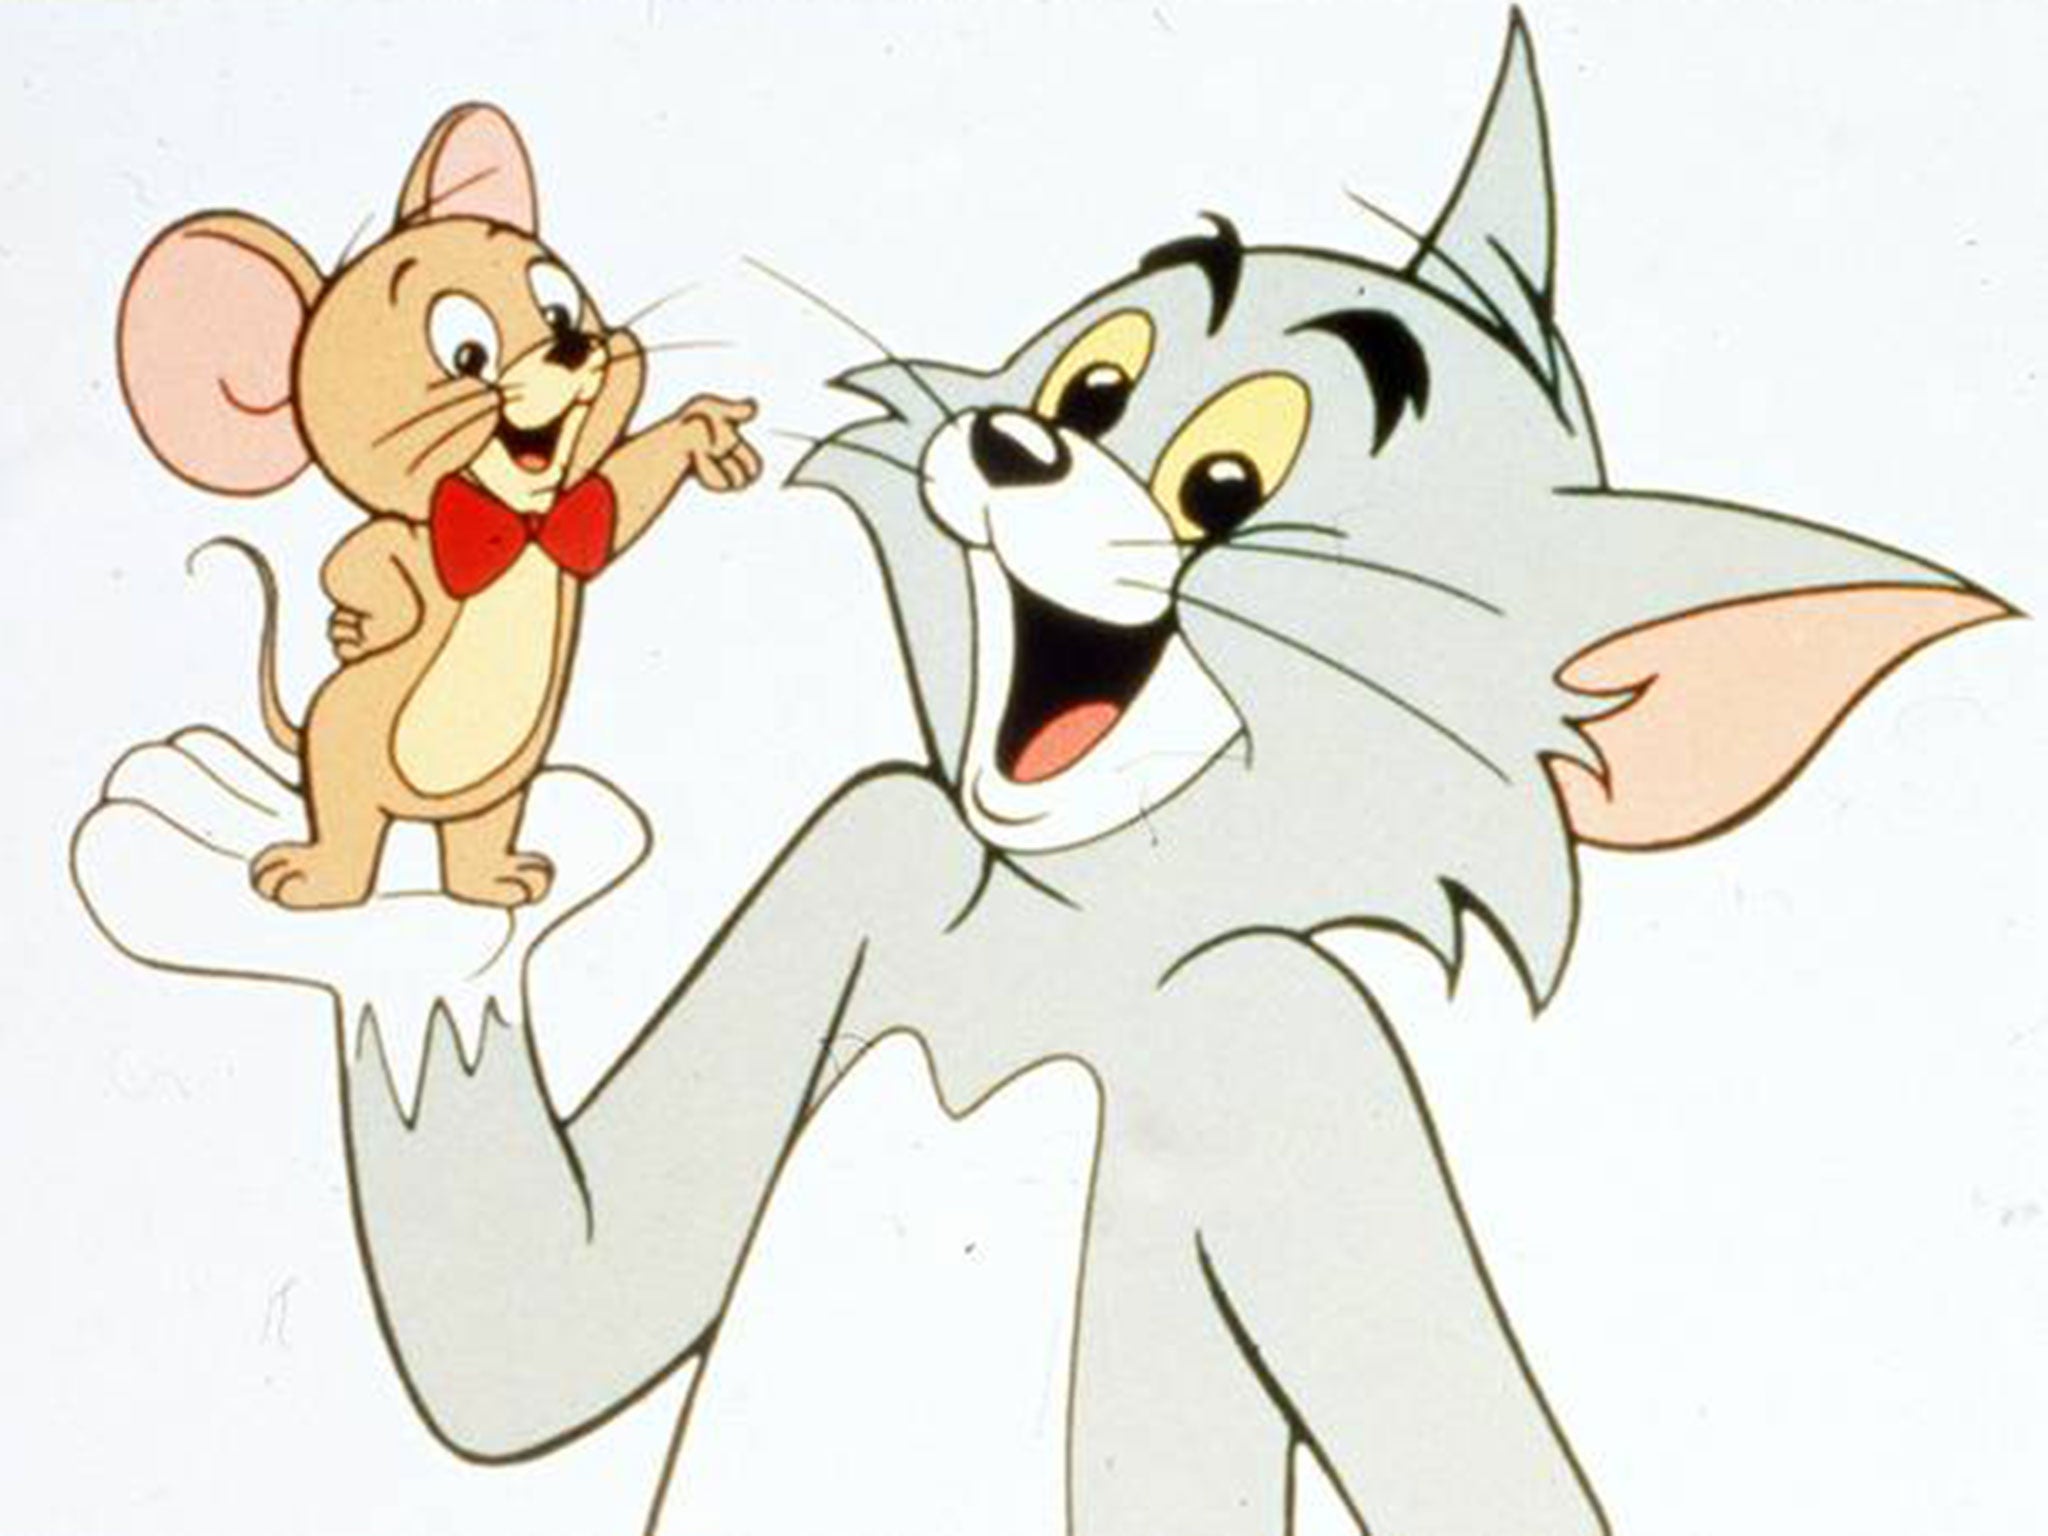 Tom and Jerry cartoons now carry a 'racial prejudice' warning on Amazon |  The Independent | The Independent